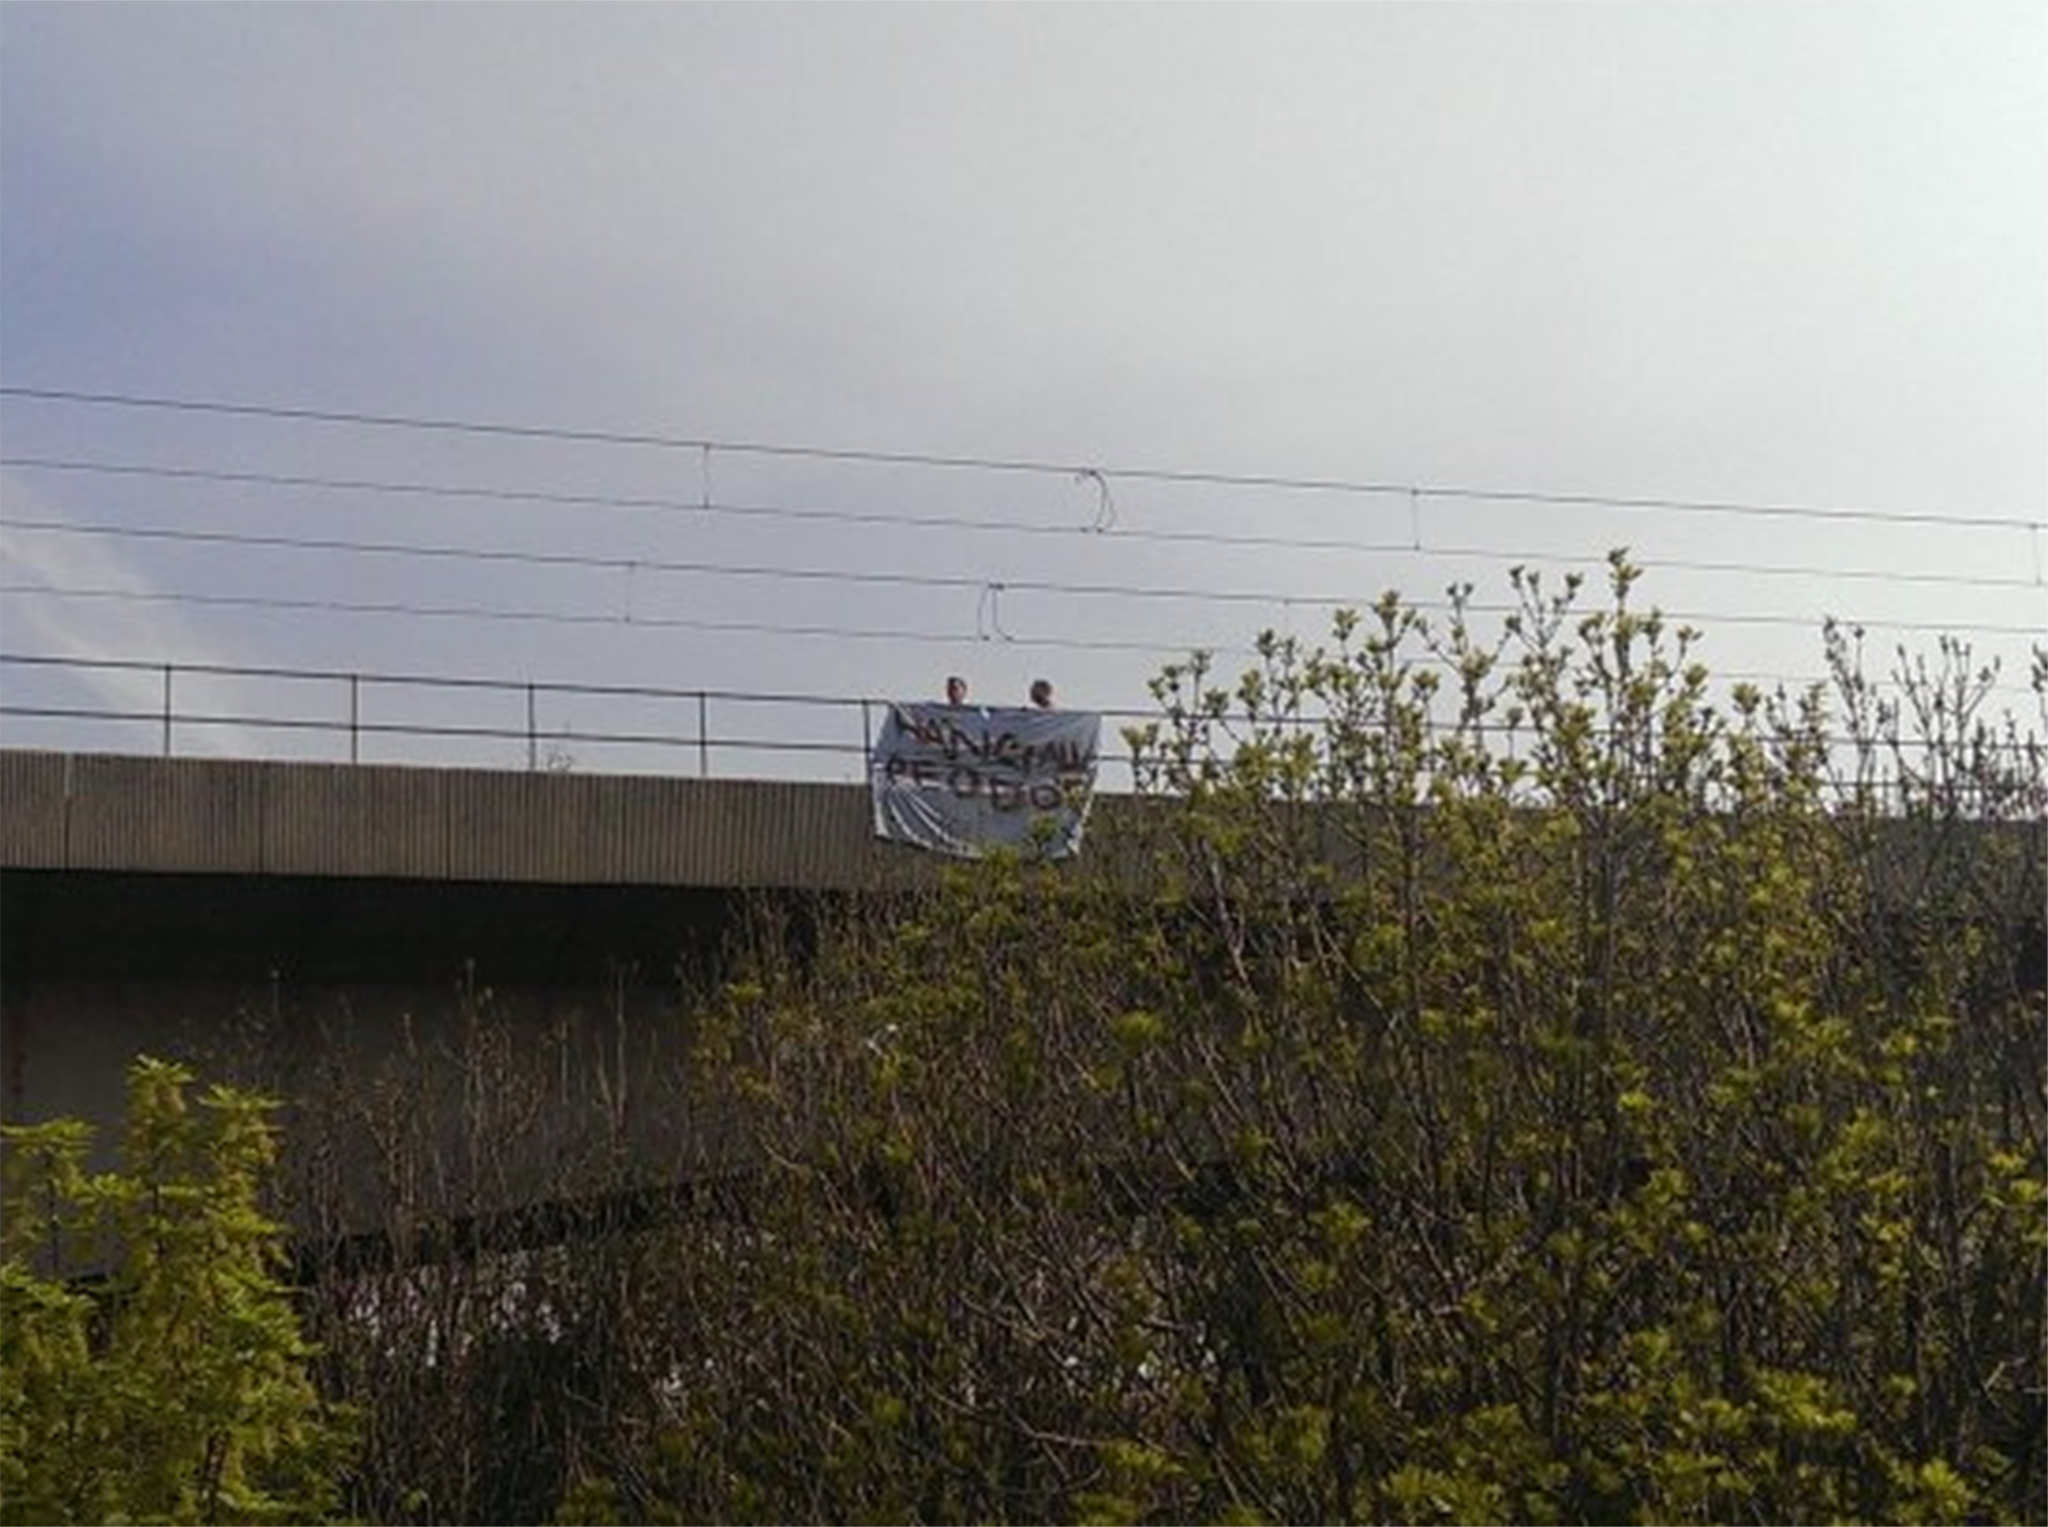 The two men standing with their banner on the Byker viaduct in Newcastle while being watched by police officers